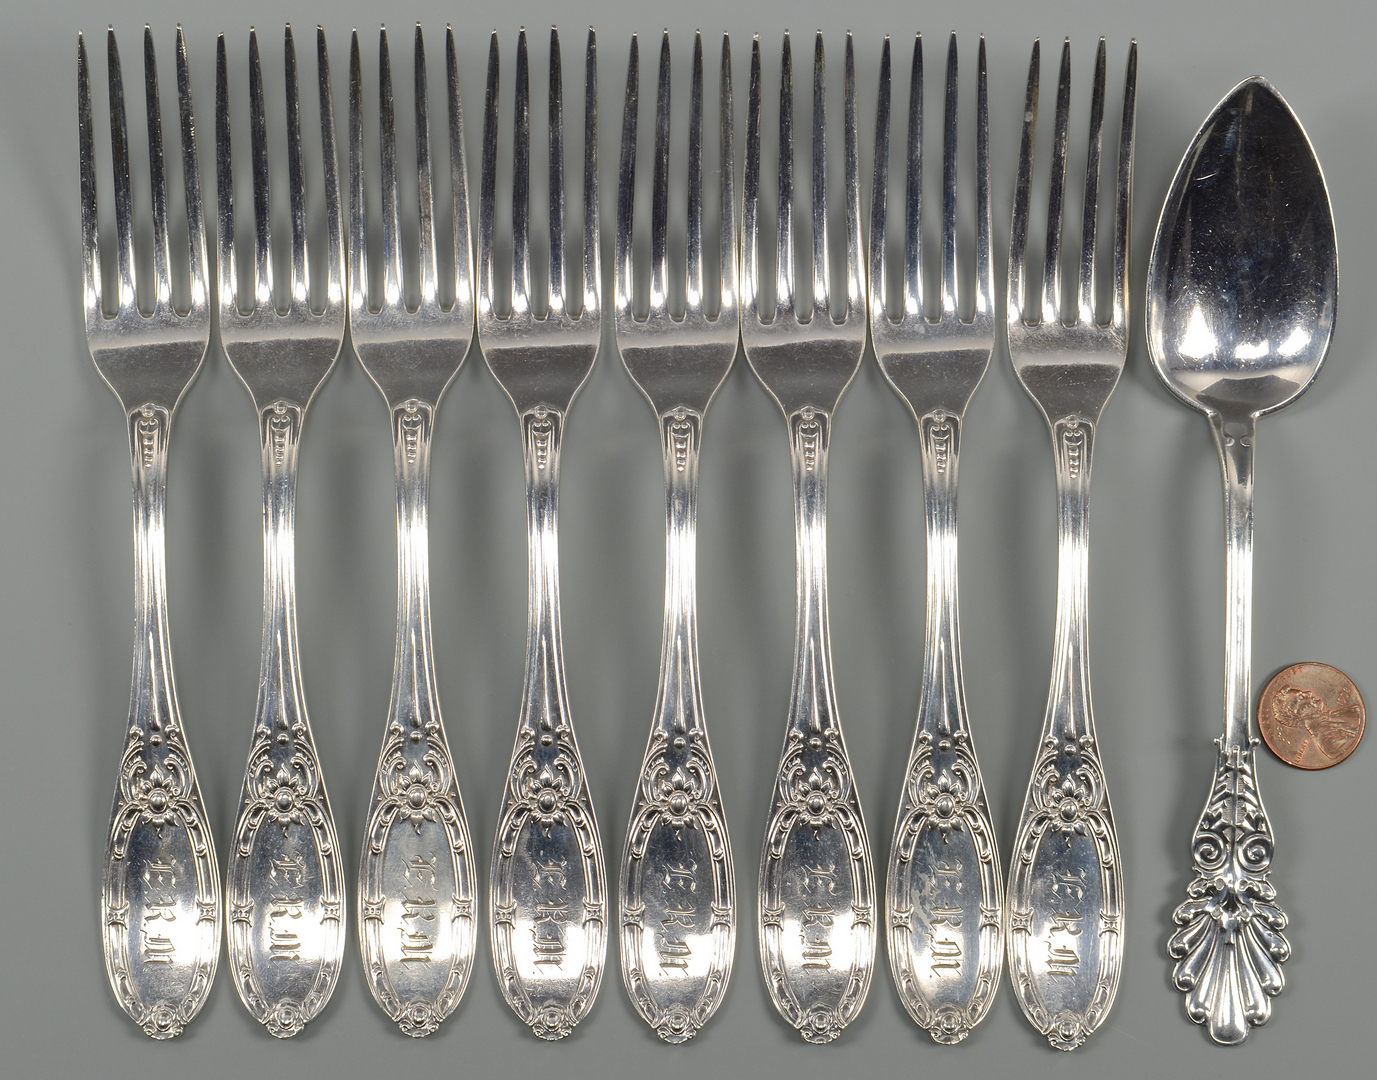 Lot 247: 8 NY Coin Silver Forks + 1 spoon